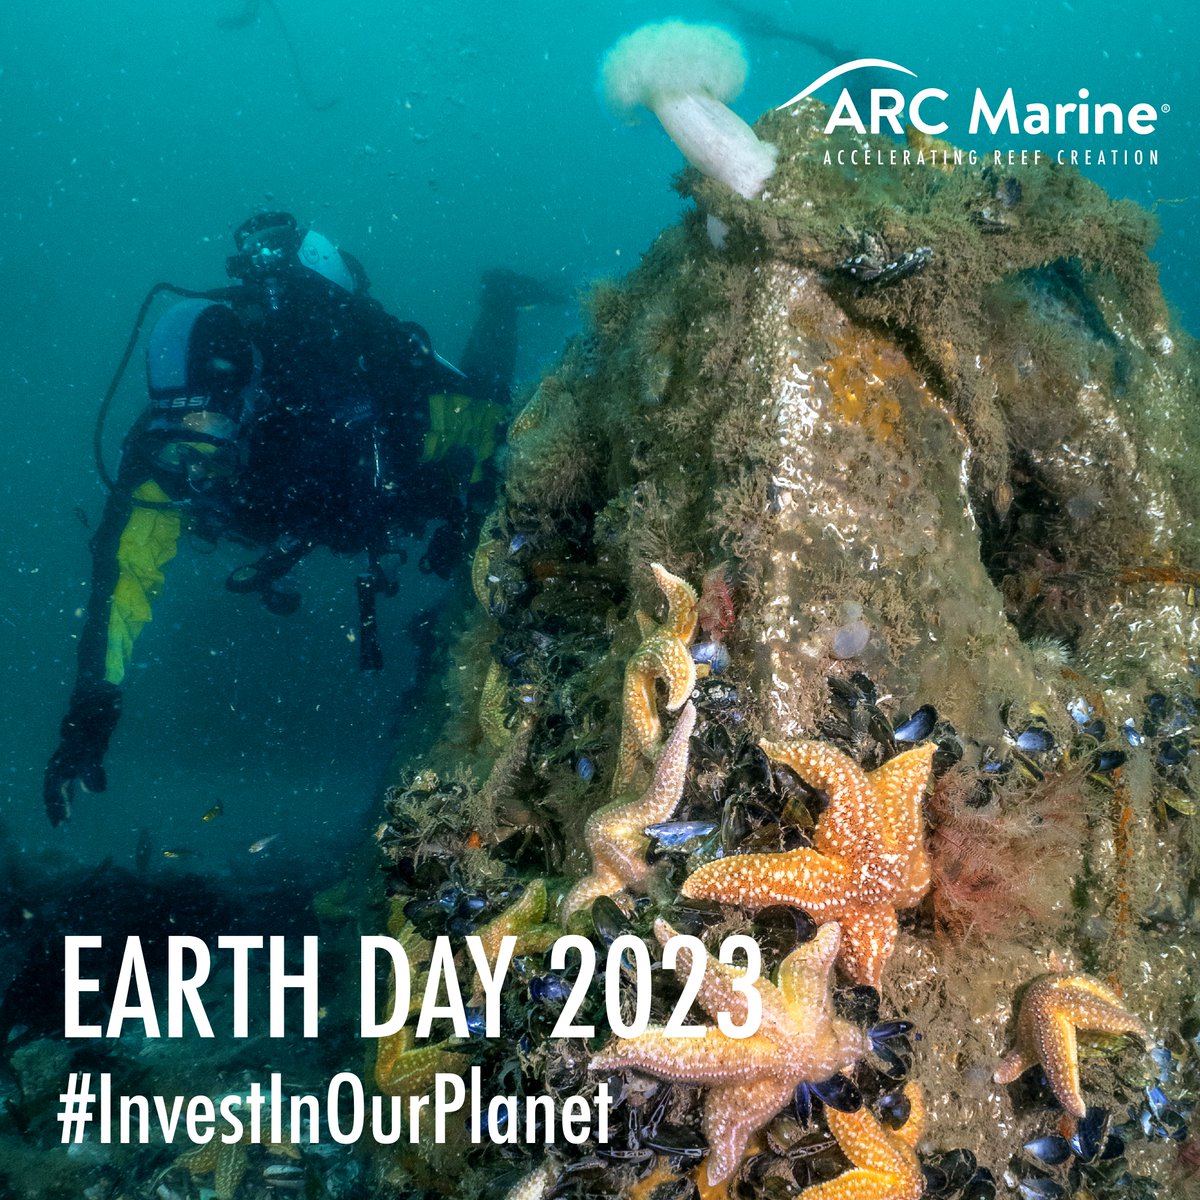 How will you #InvestInOurPlanet?🌍🌊

At #ARCMarine we’re investing in solutions for the #biodiversityloss crisis with our #lowcarbon Nature Inclusive Designs (NIDs).

They're integral in our mission to accelerate reef creation, boosting #biodiversity globally.

#EarthDay2023🙌